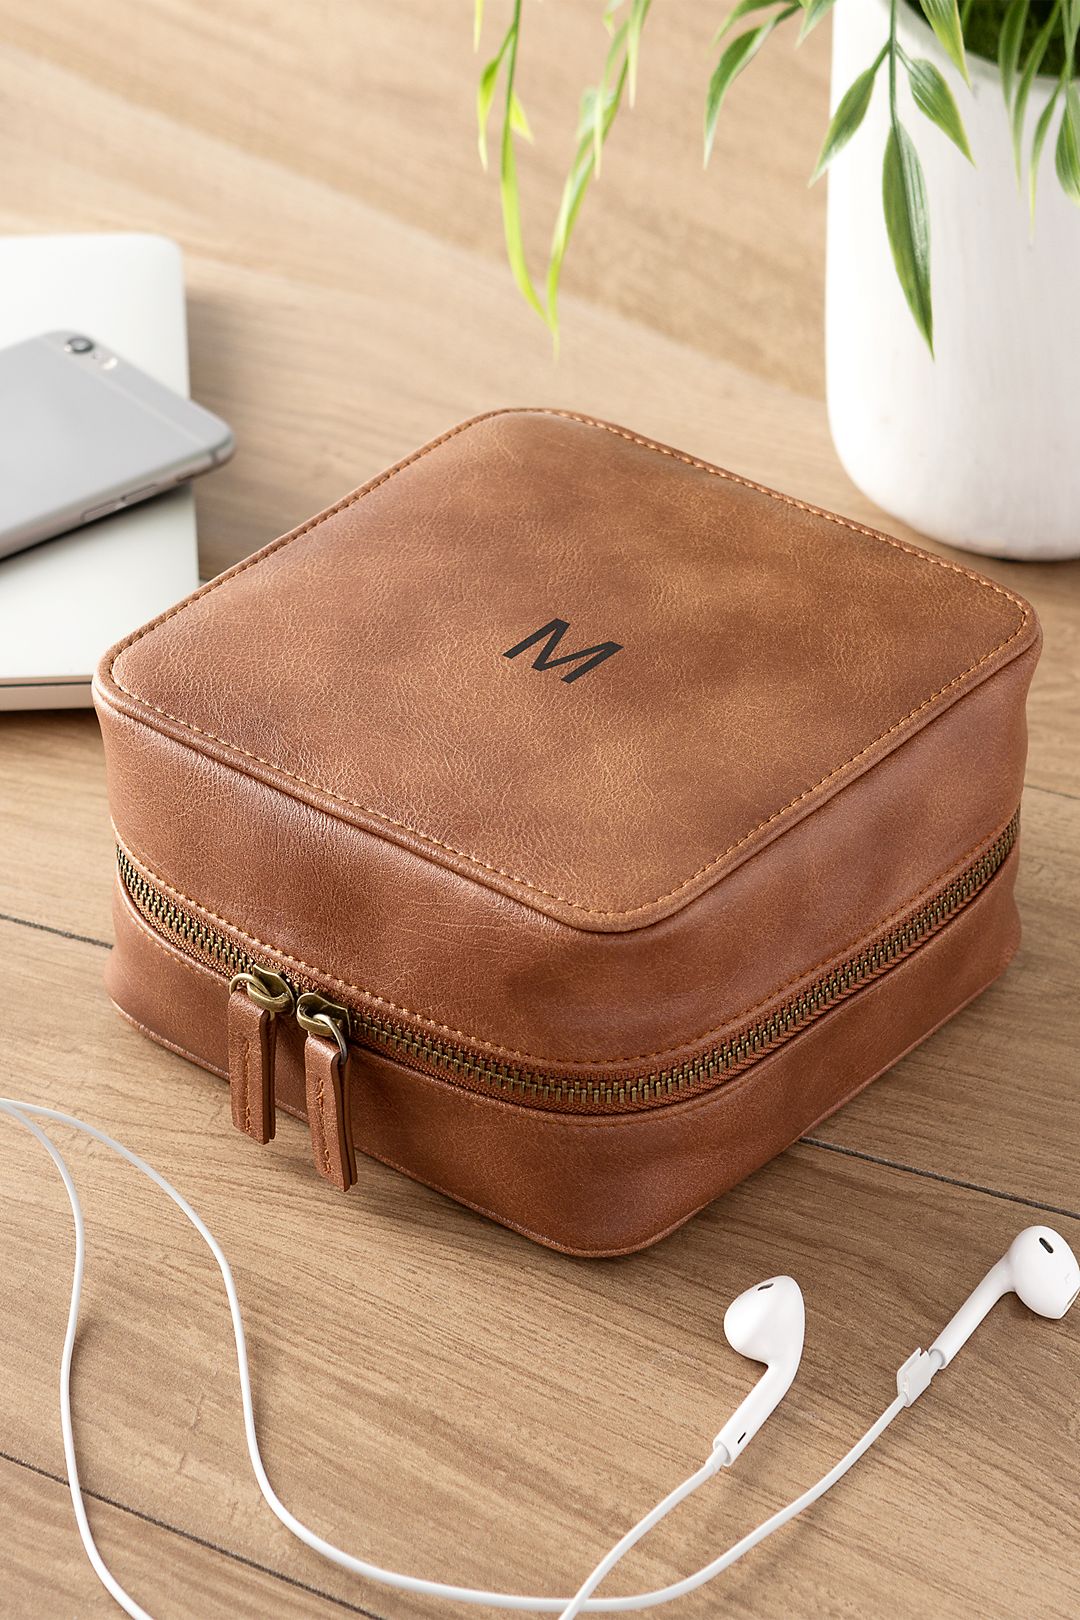 Personalized Vegan Leather Travel Tech Case Image 1